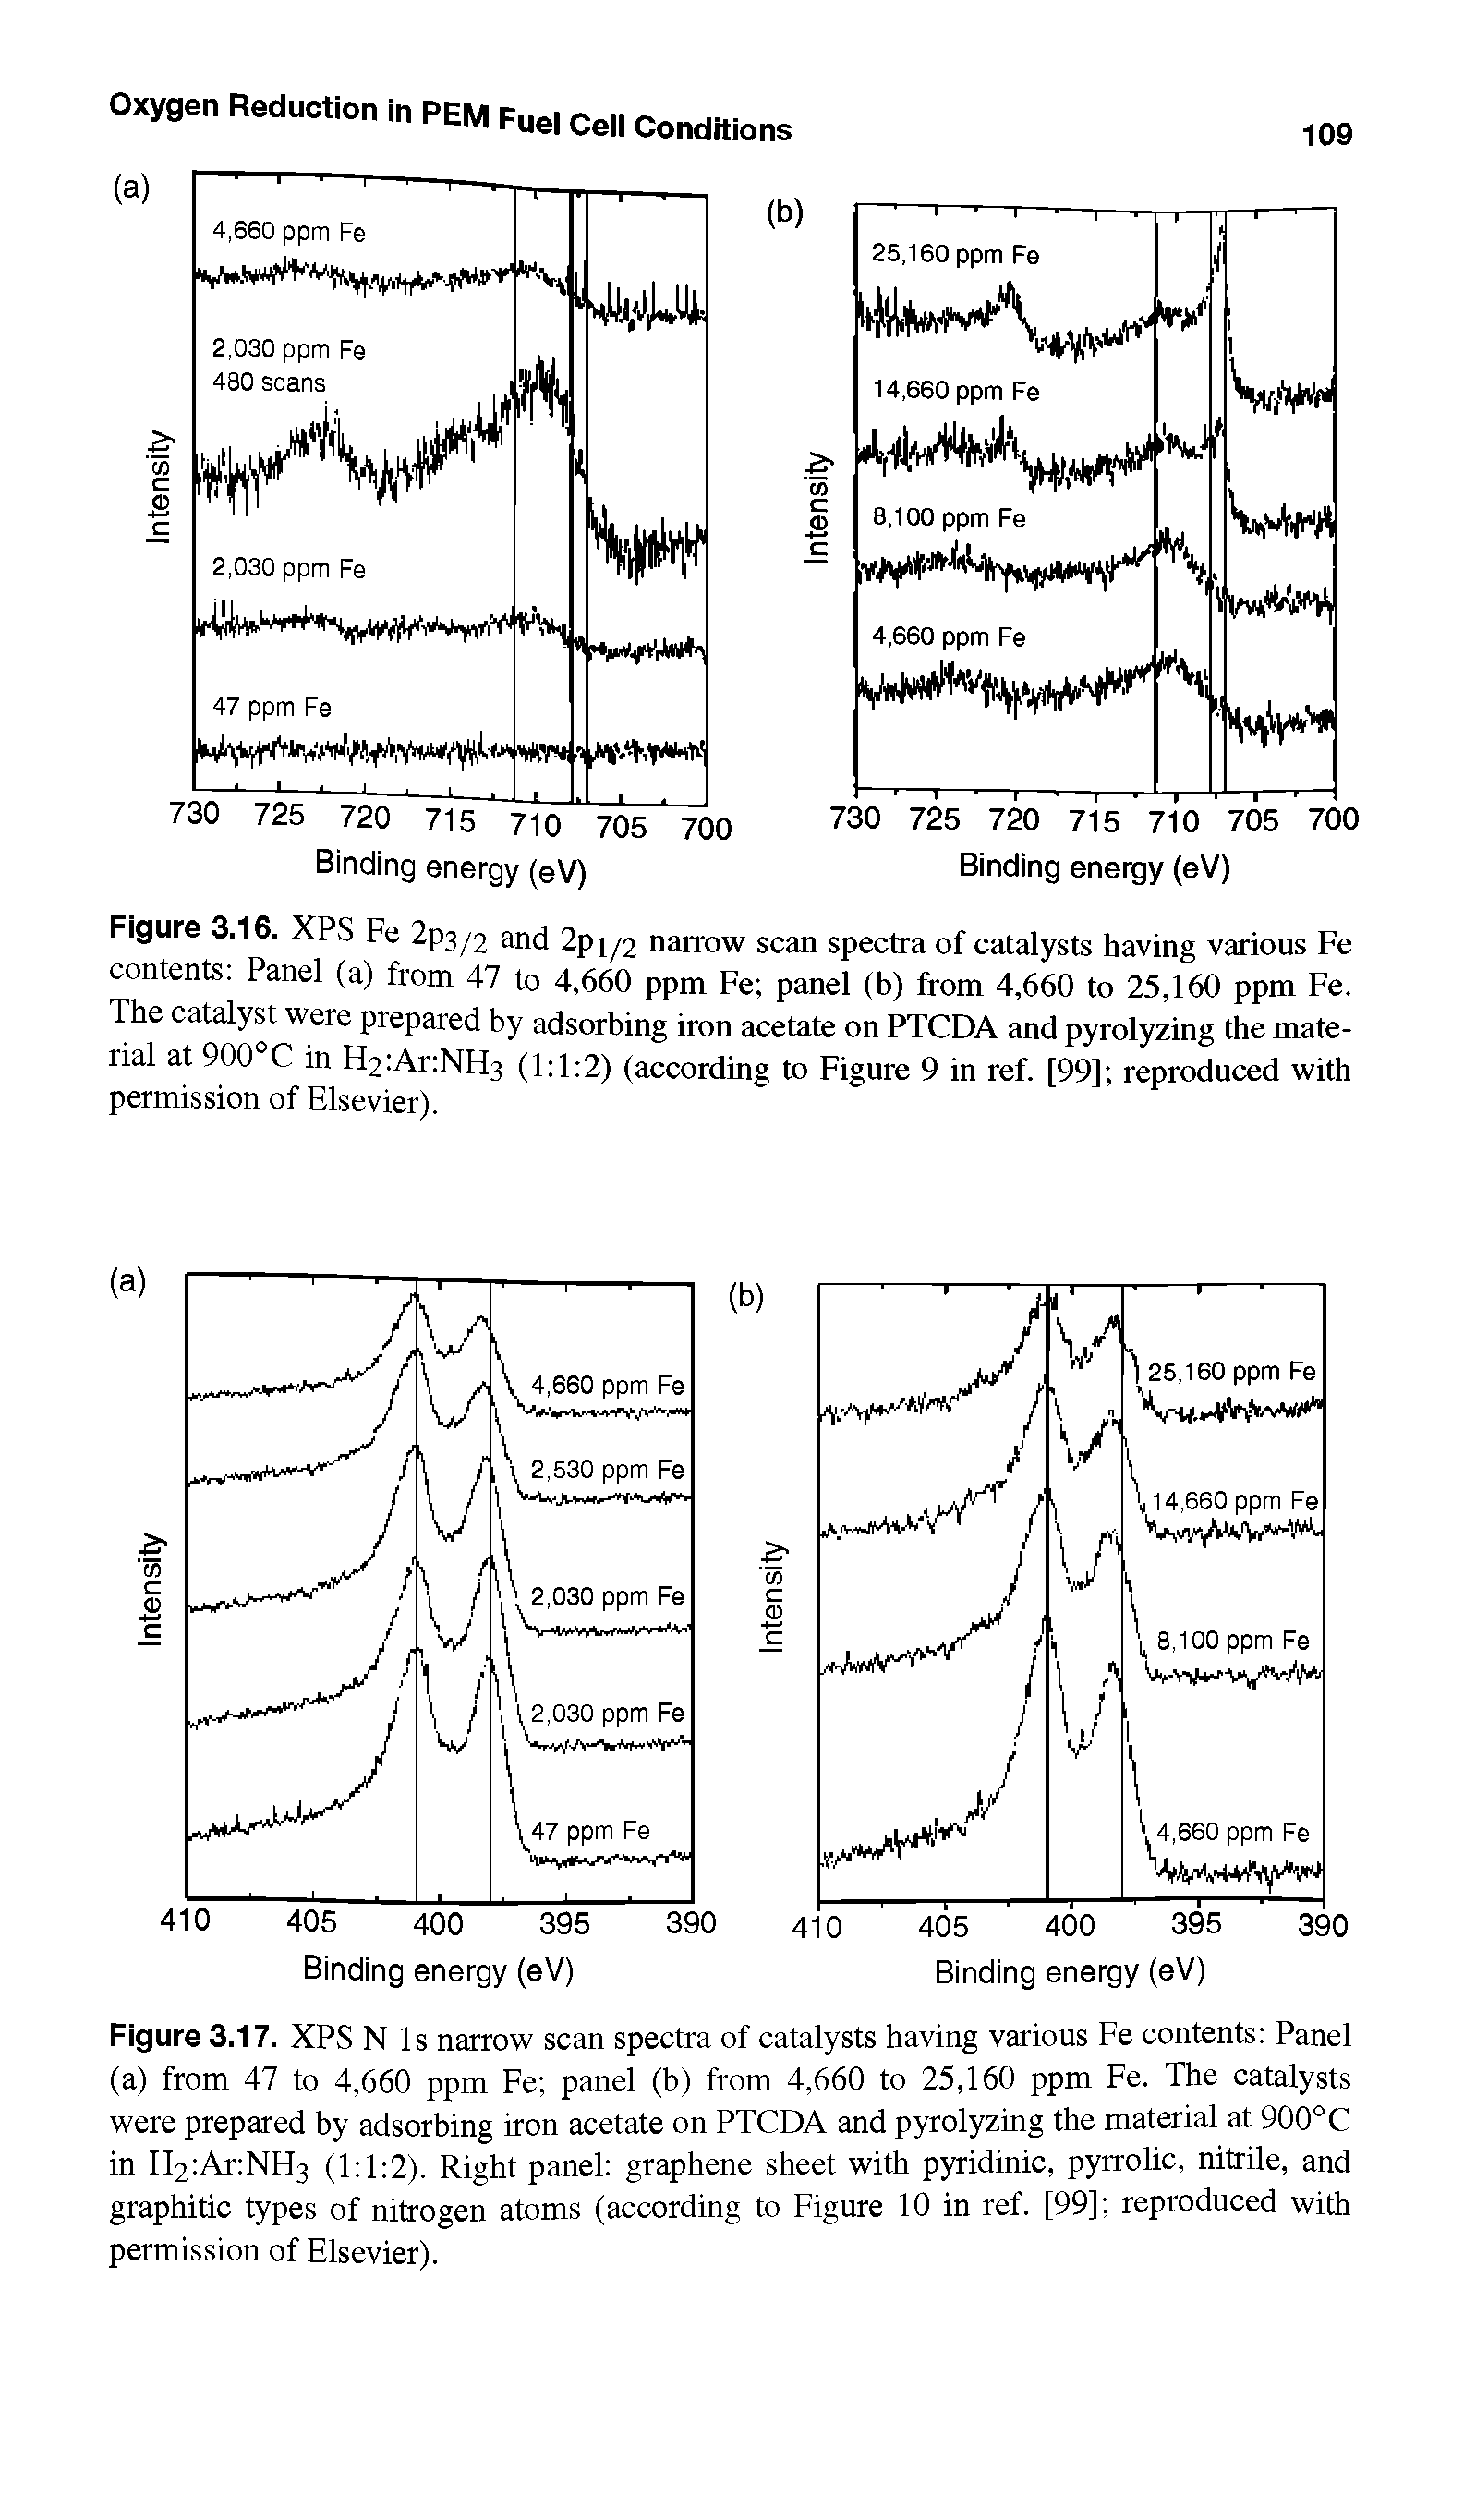 Figure 3.16. XPS Fe 2p3/2 and 2pi/2 narrow scan spectra of catalysts having various Fe contents Panel (a) from 47 to 4,660 ppm Fe panel (b) from 4,660 to 25,160 ppm Fe. The catalyst were prepared by adsorbing iron acetate on PTCDA and pyrolyzing the material at OOO C in H2 Ar NFl3 (1 1 2) (according to Figure 9 in ref. [99] reproduced with permission of Elsevier).